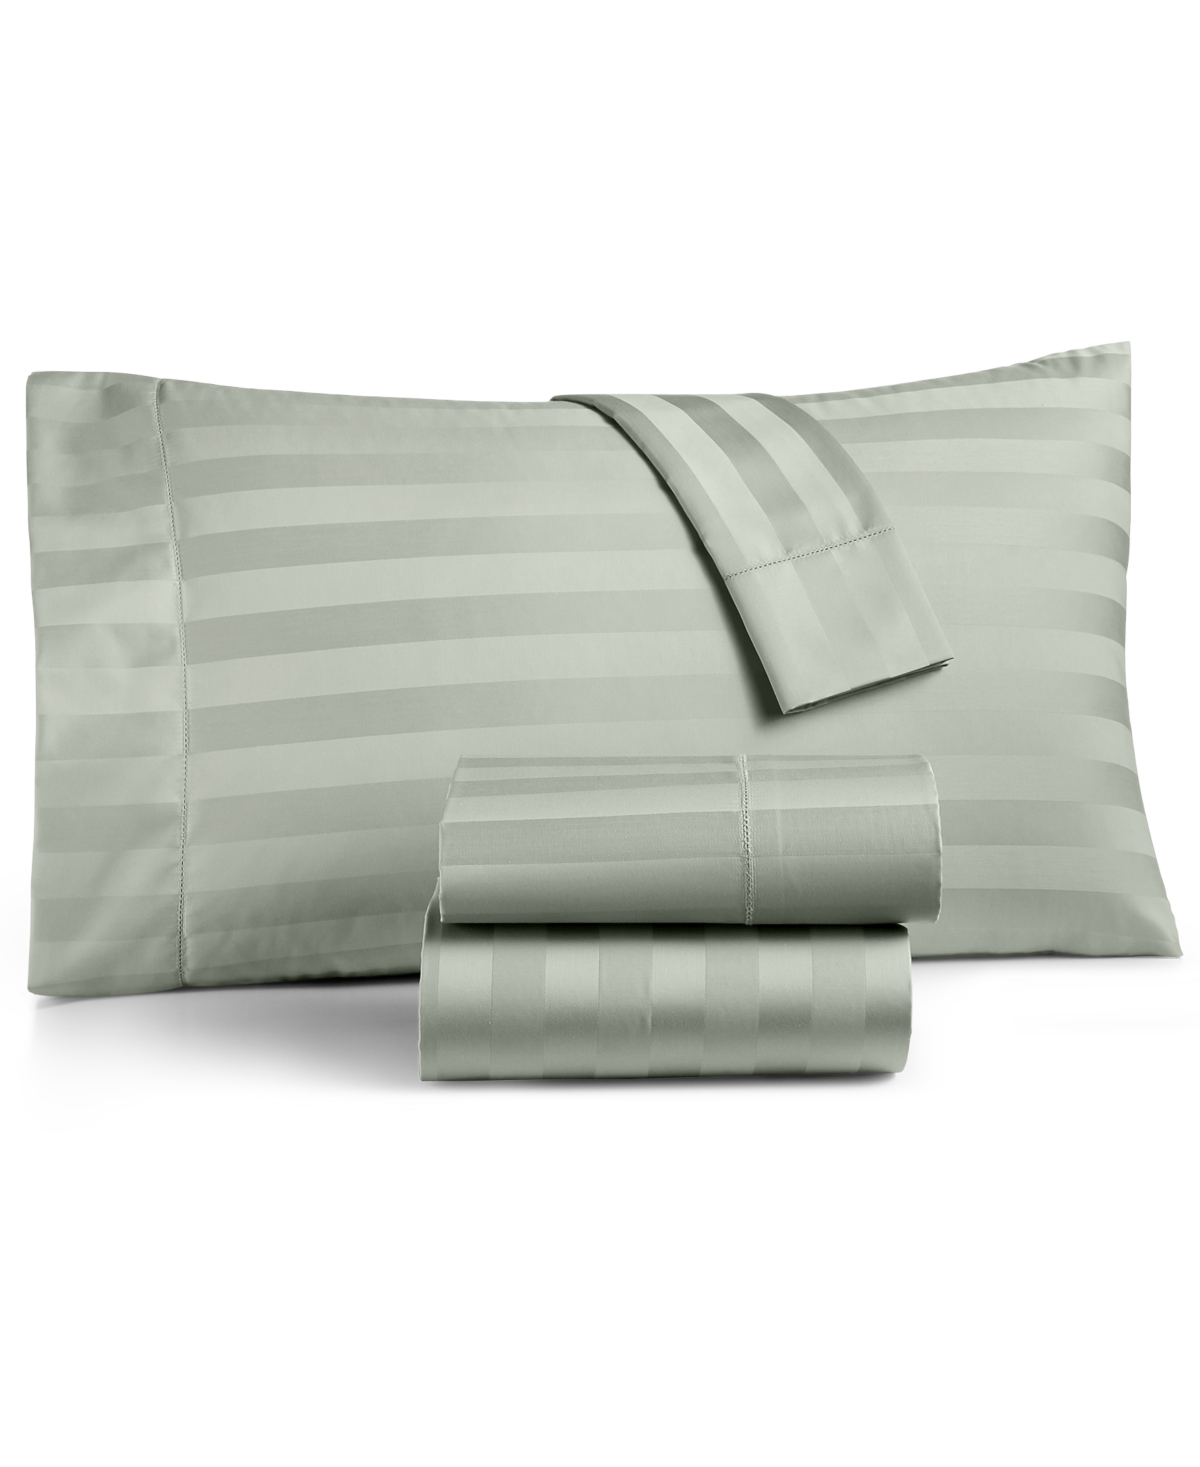 Charter Club Damask 1.5" Stripe 550 Thread Count 100% Cotton 3-pc. Sheet Set, Twin, Created For Macy's In Glacier